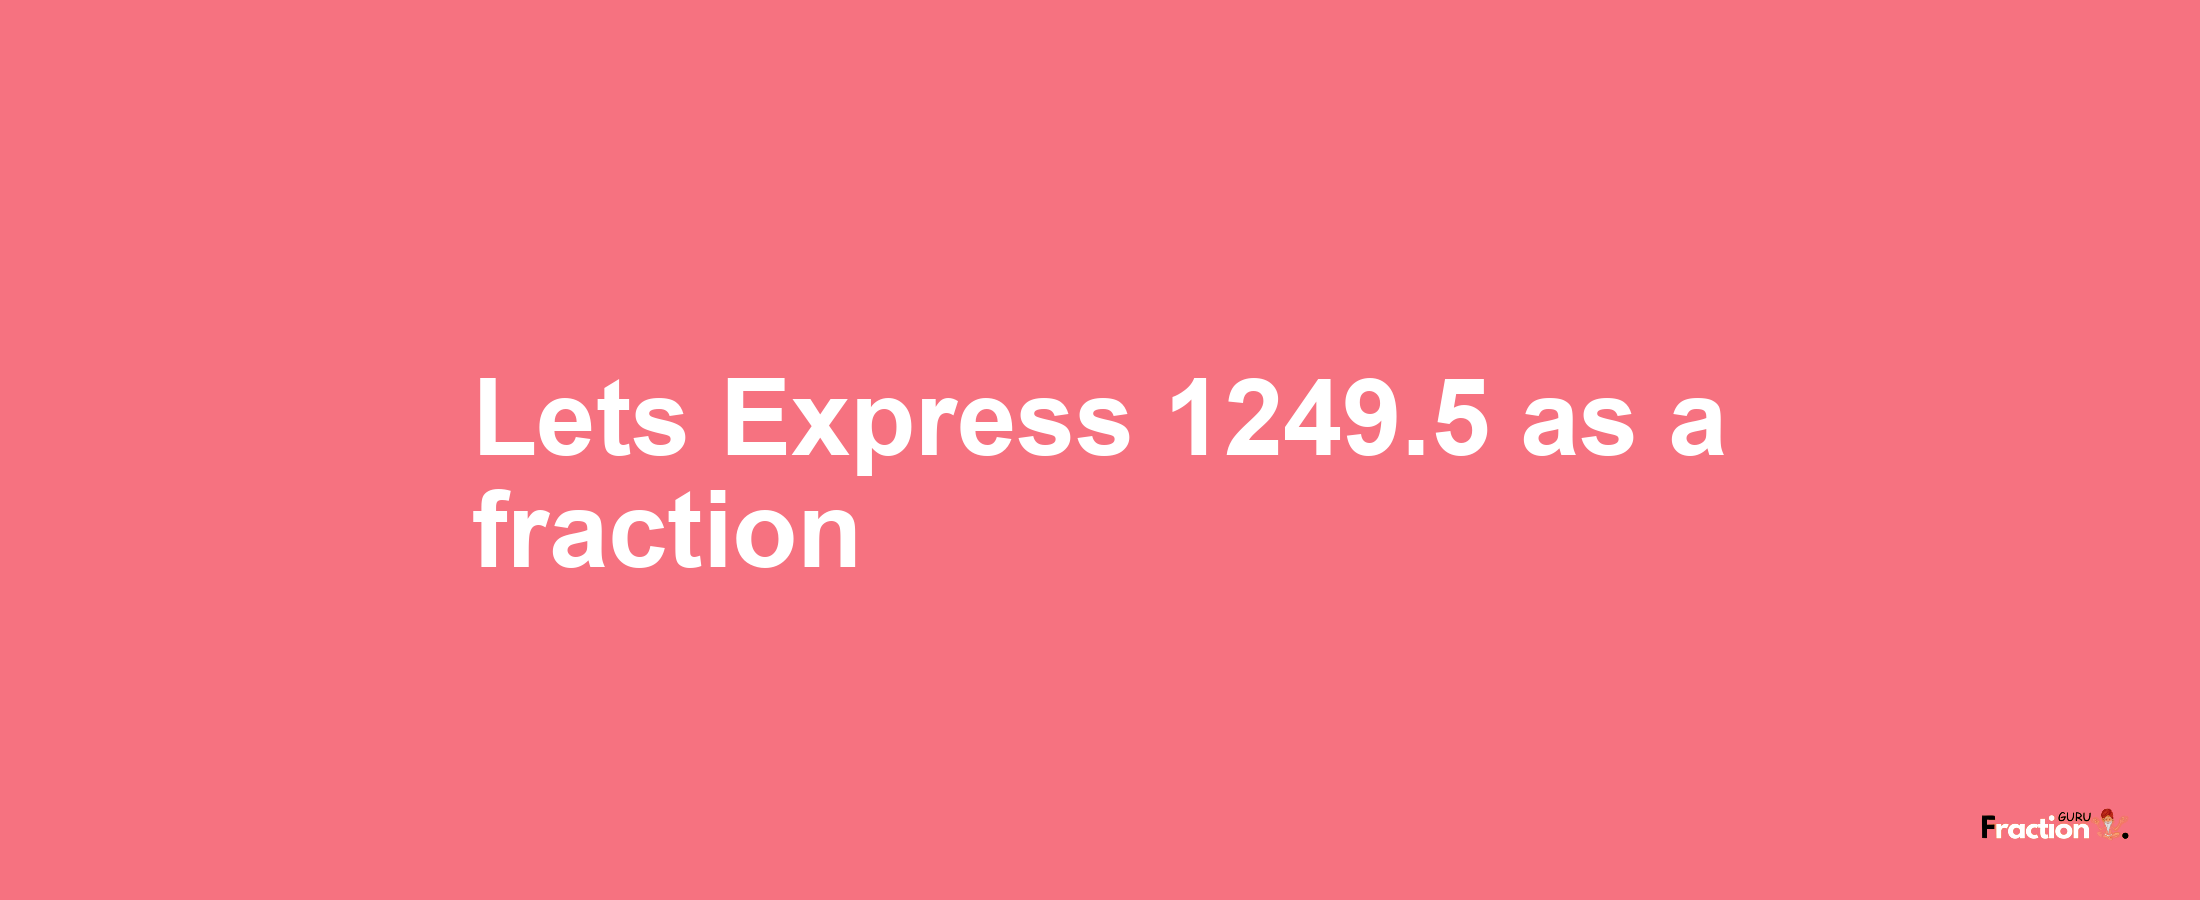 Lets Express 1249.5 as afraction